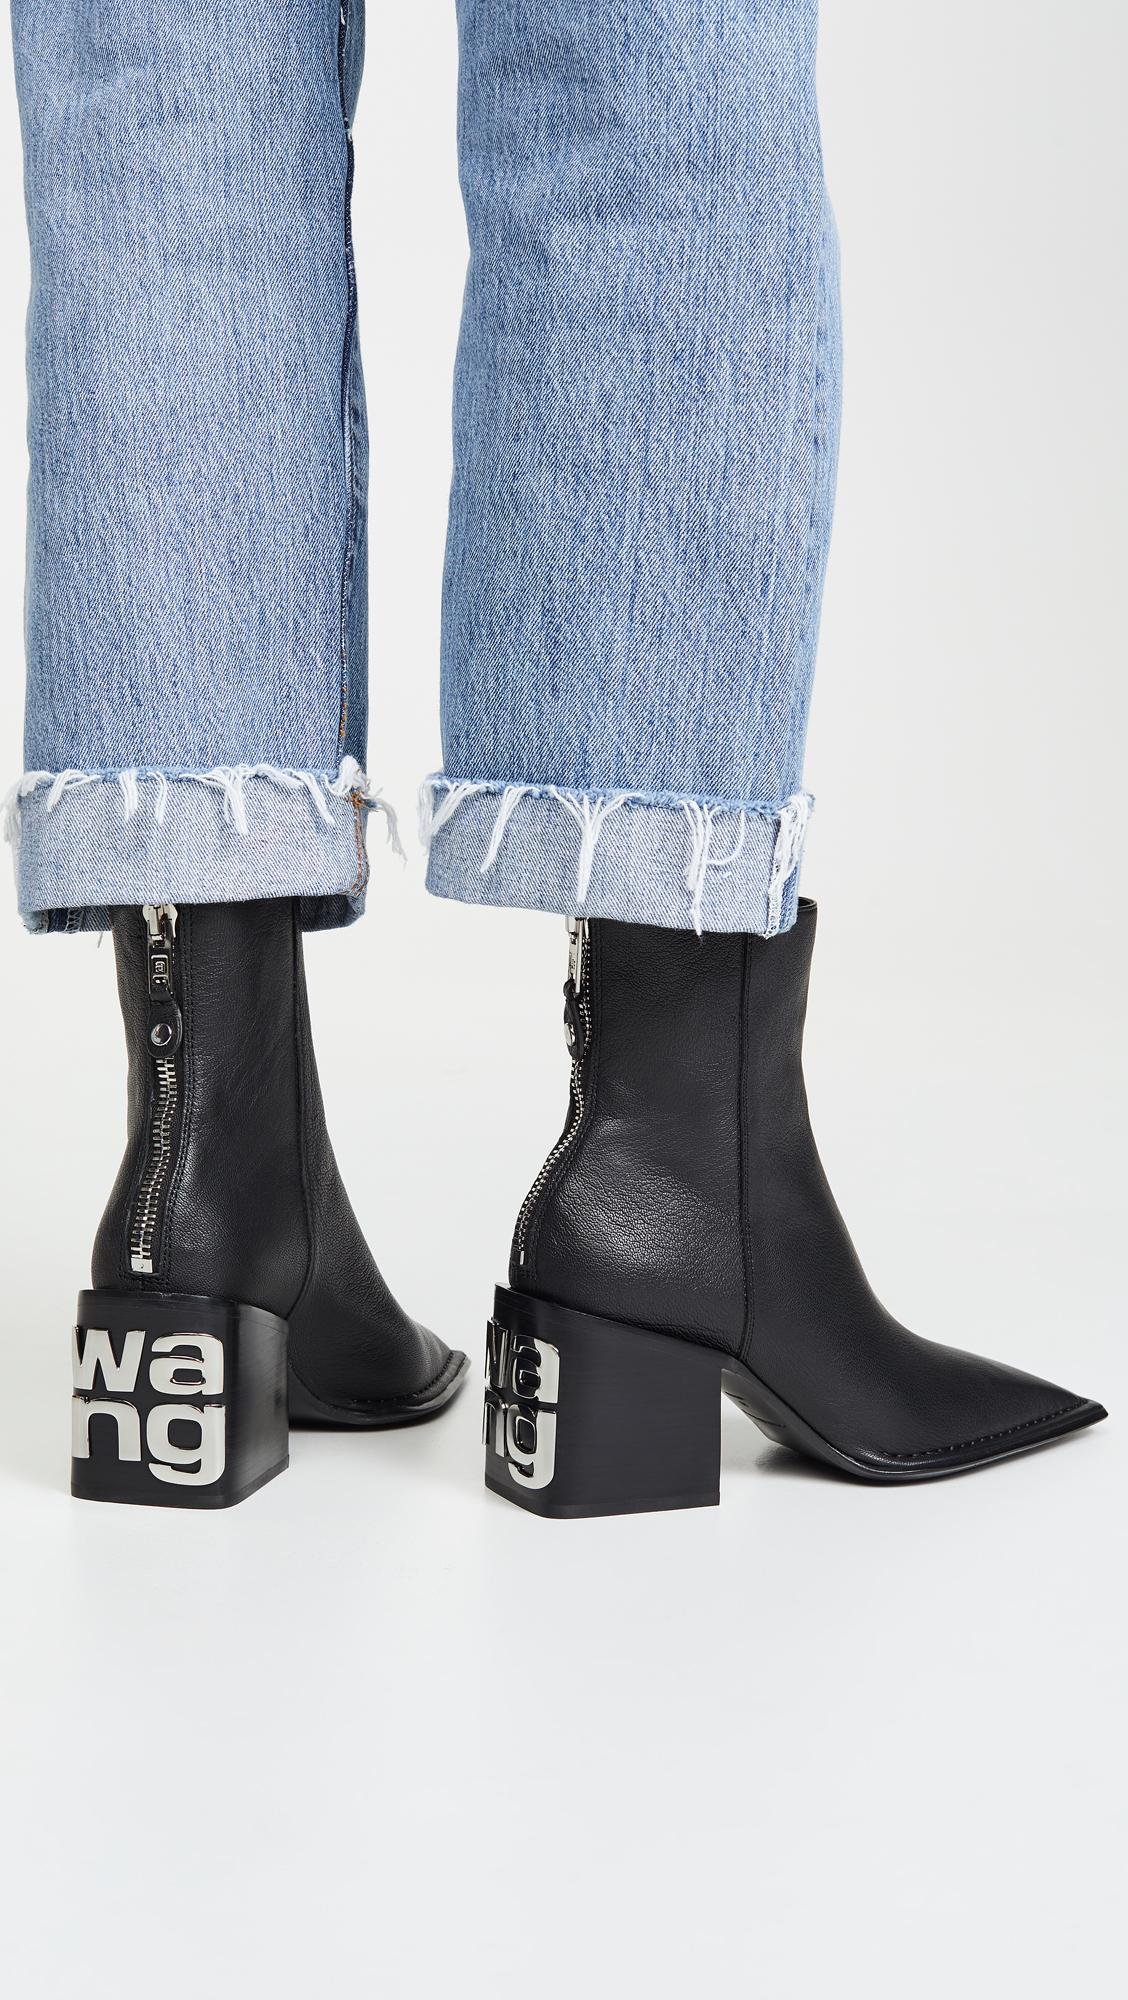 Alexander Wang Leather Parker Boots in Black - Lyst